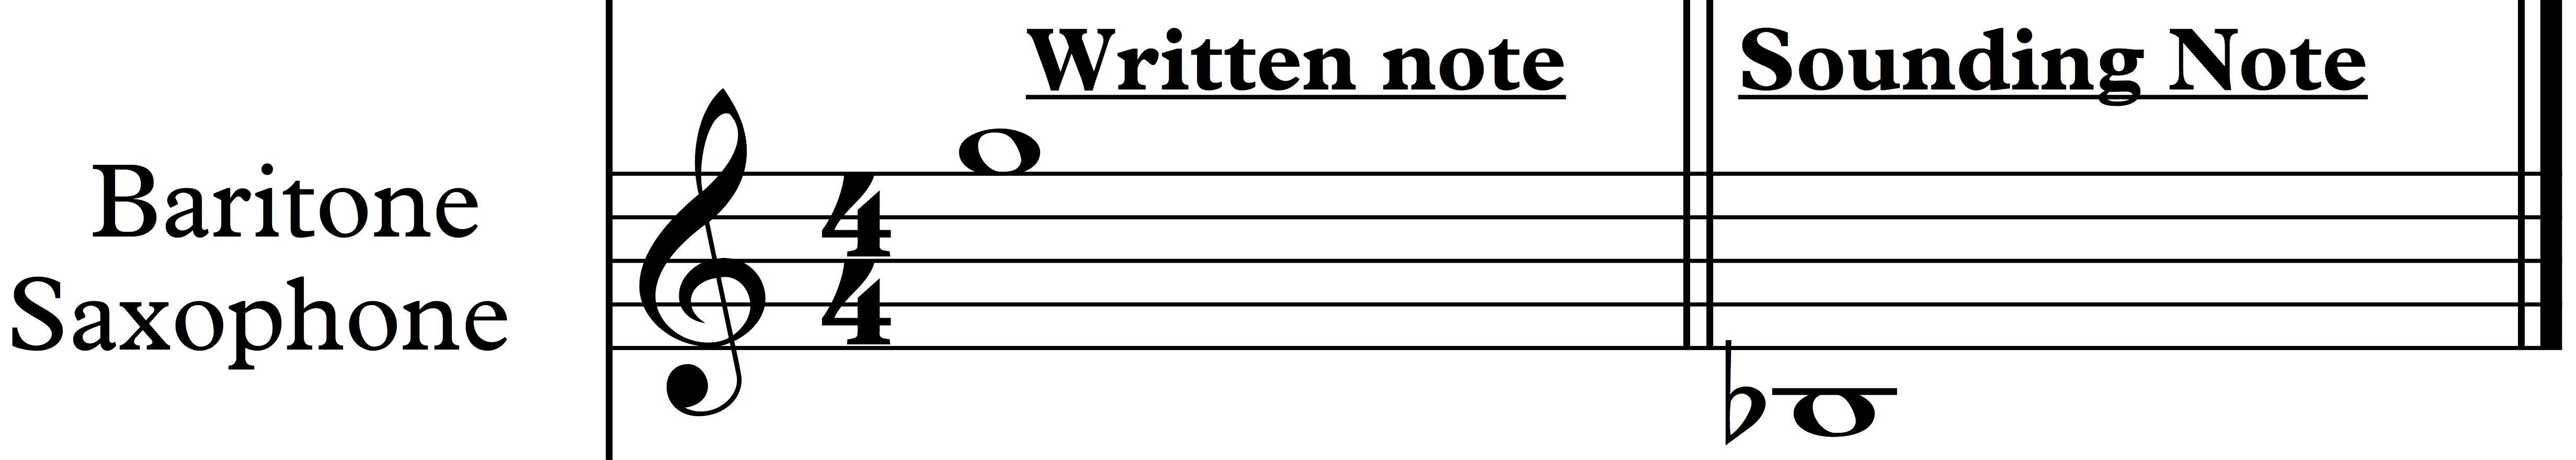 concert-pitch-transposition-chart-and-flashcards